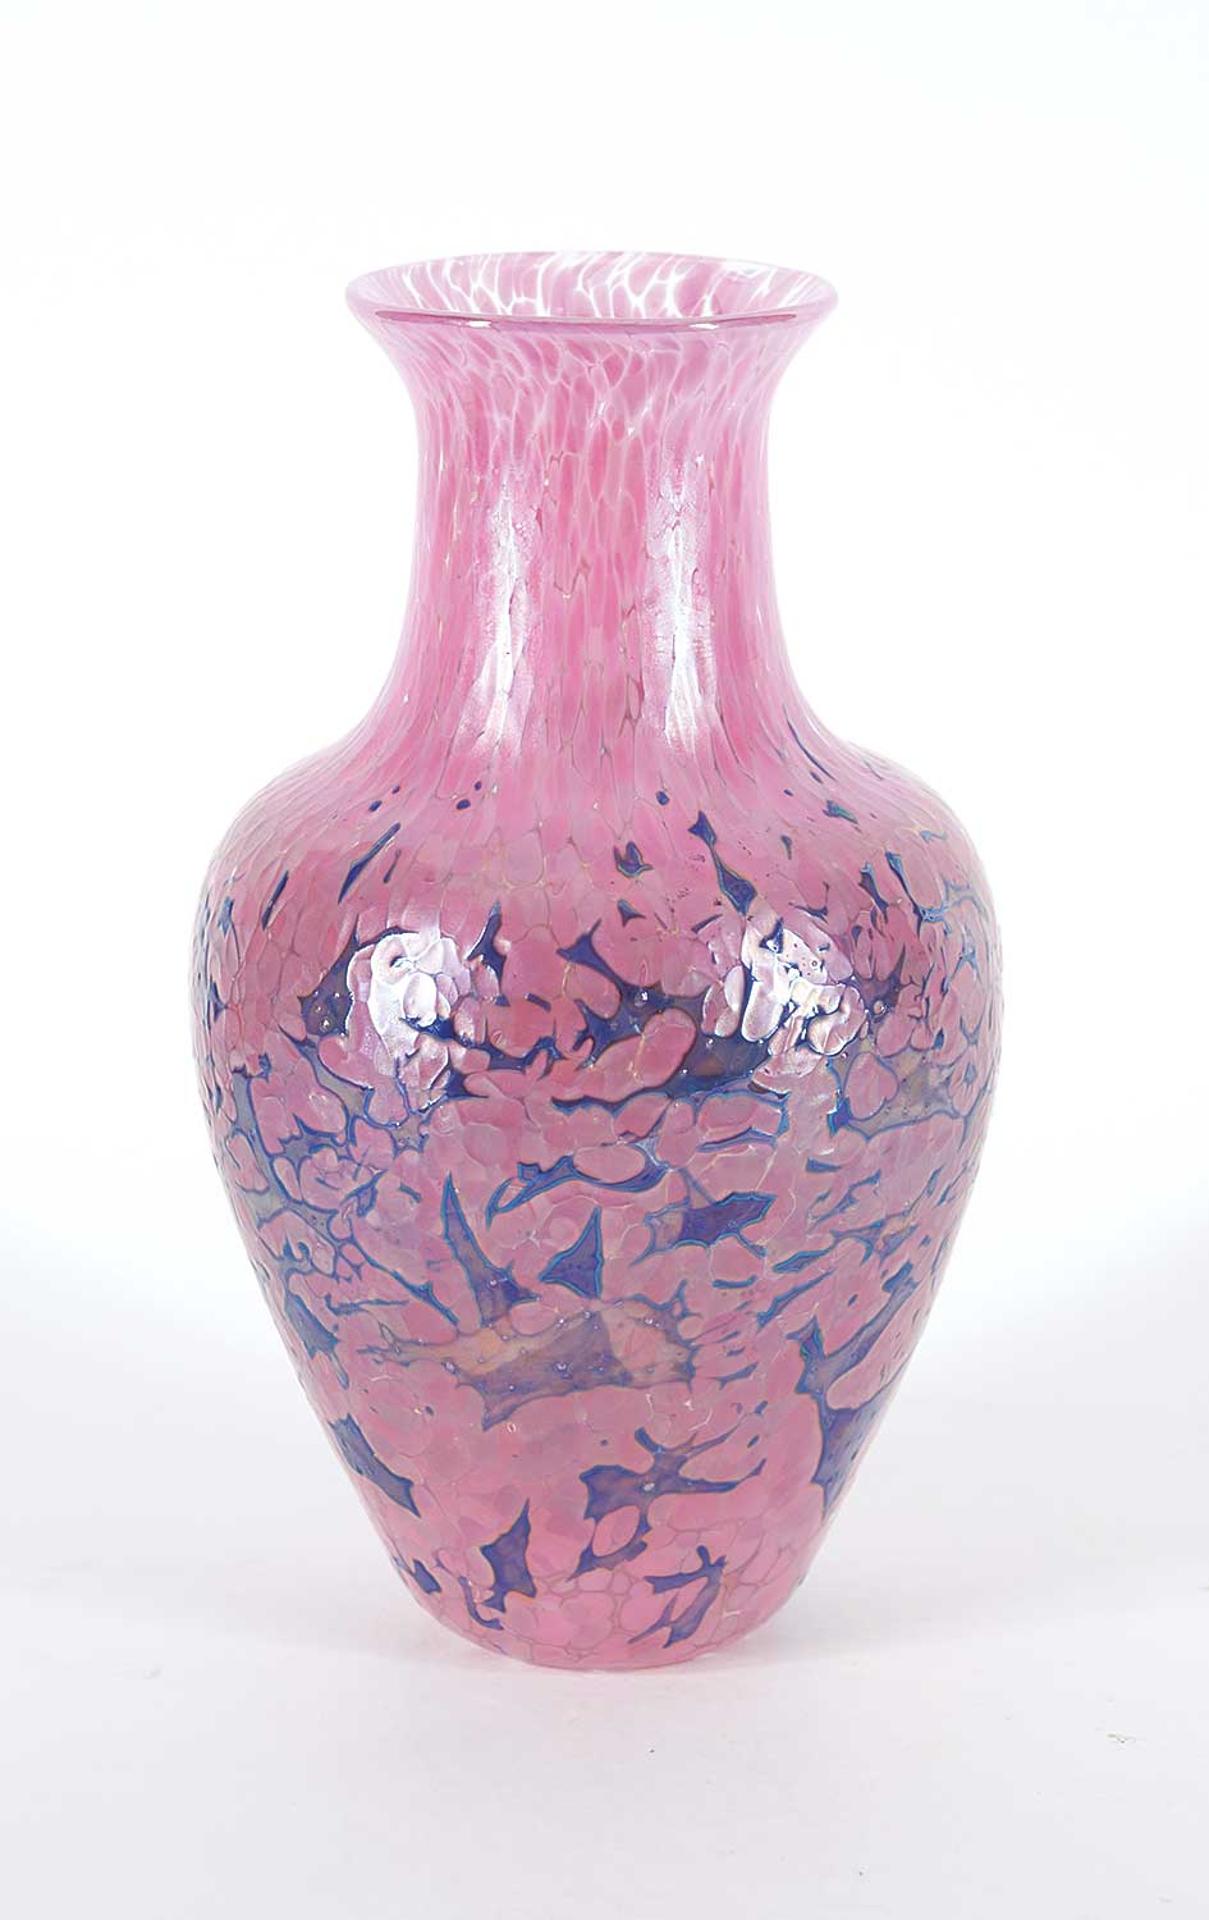 Robert D.M. Held (1943) - Untitled - Pink and Blue Vase